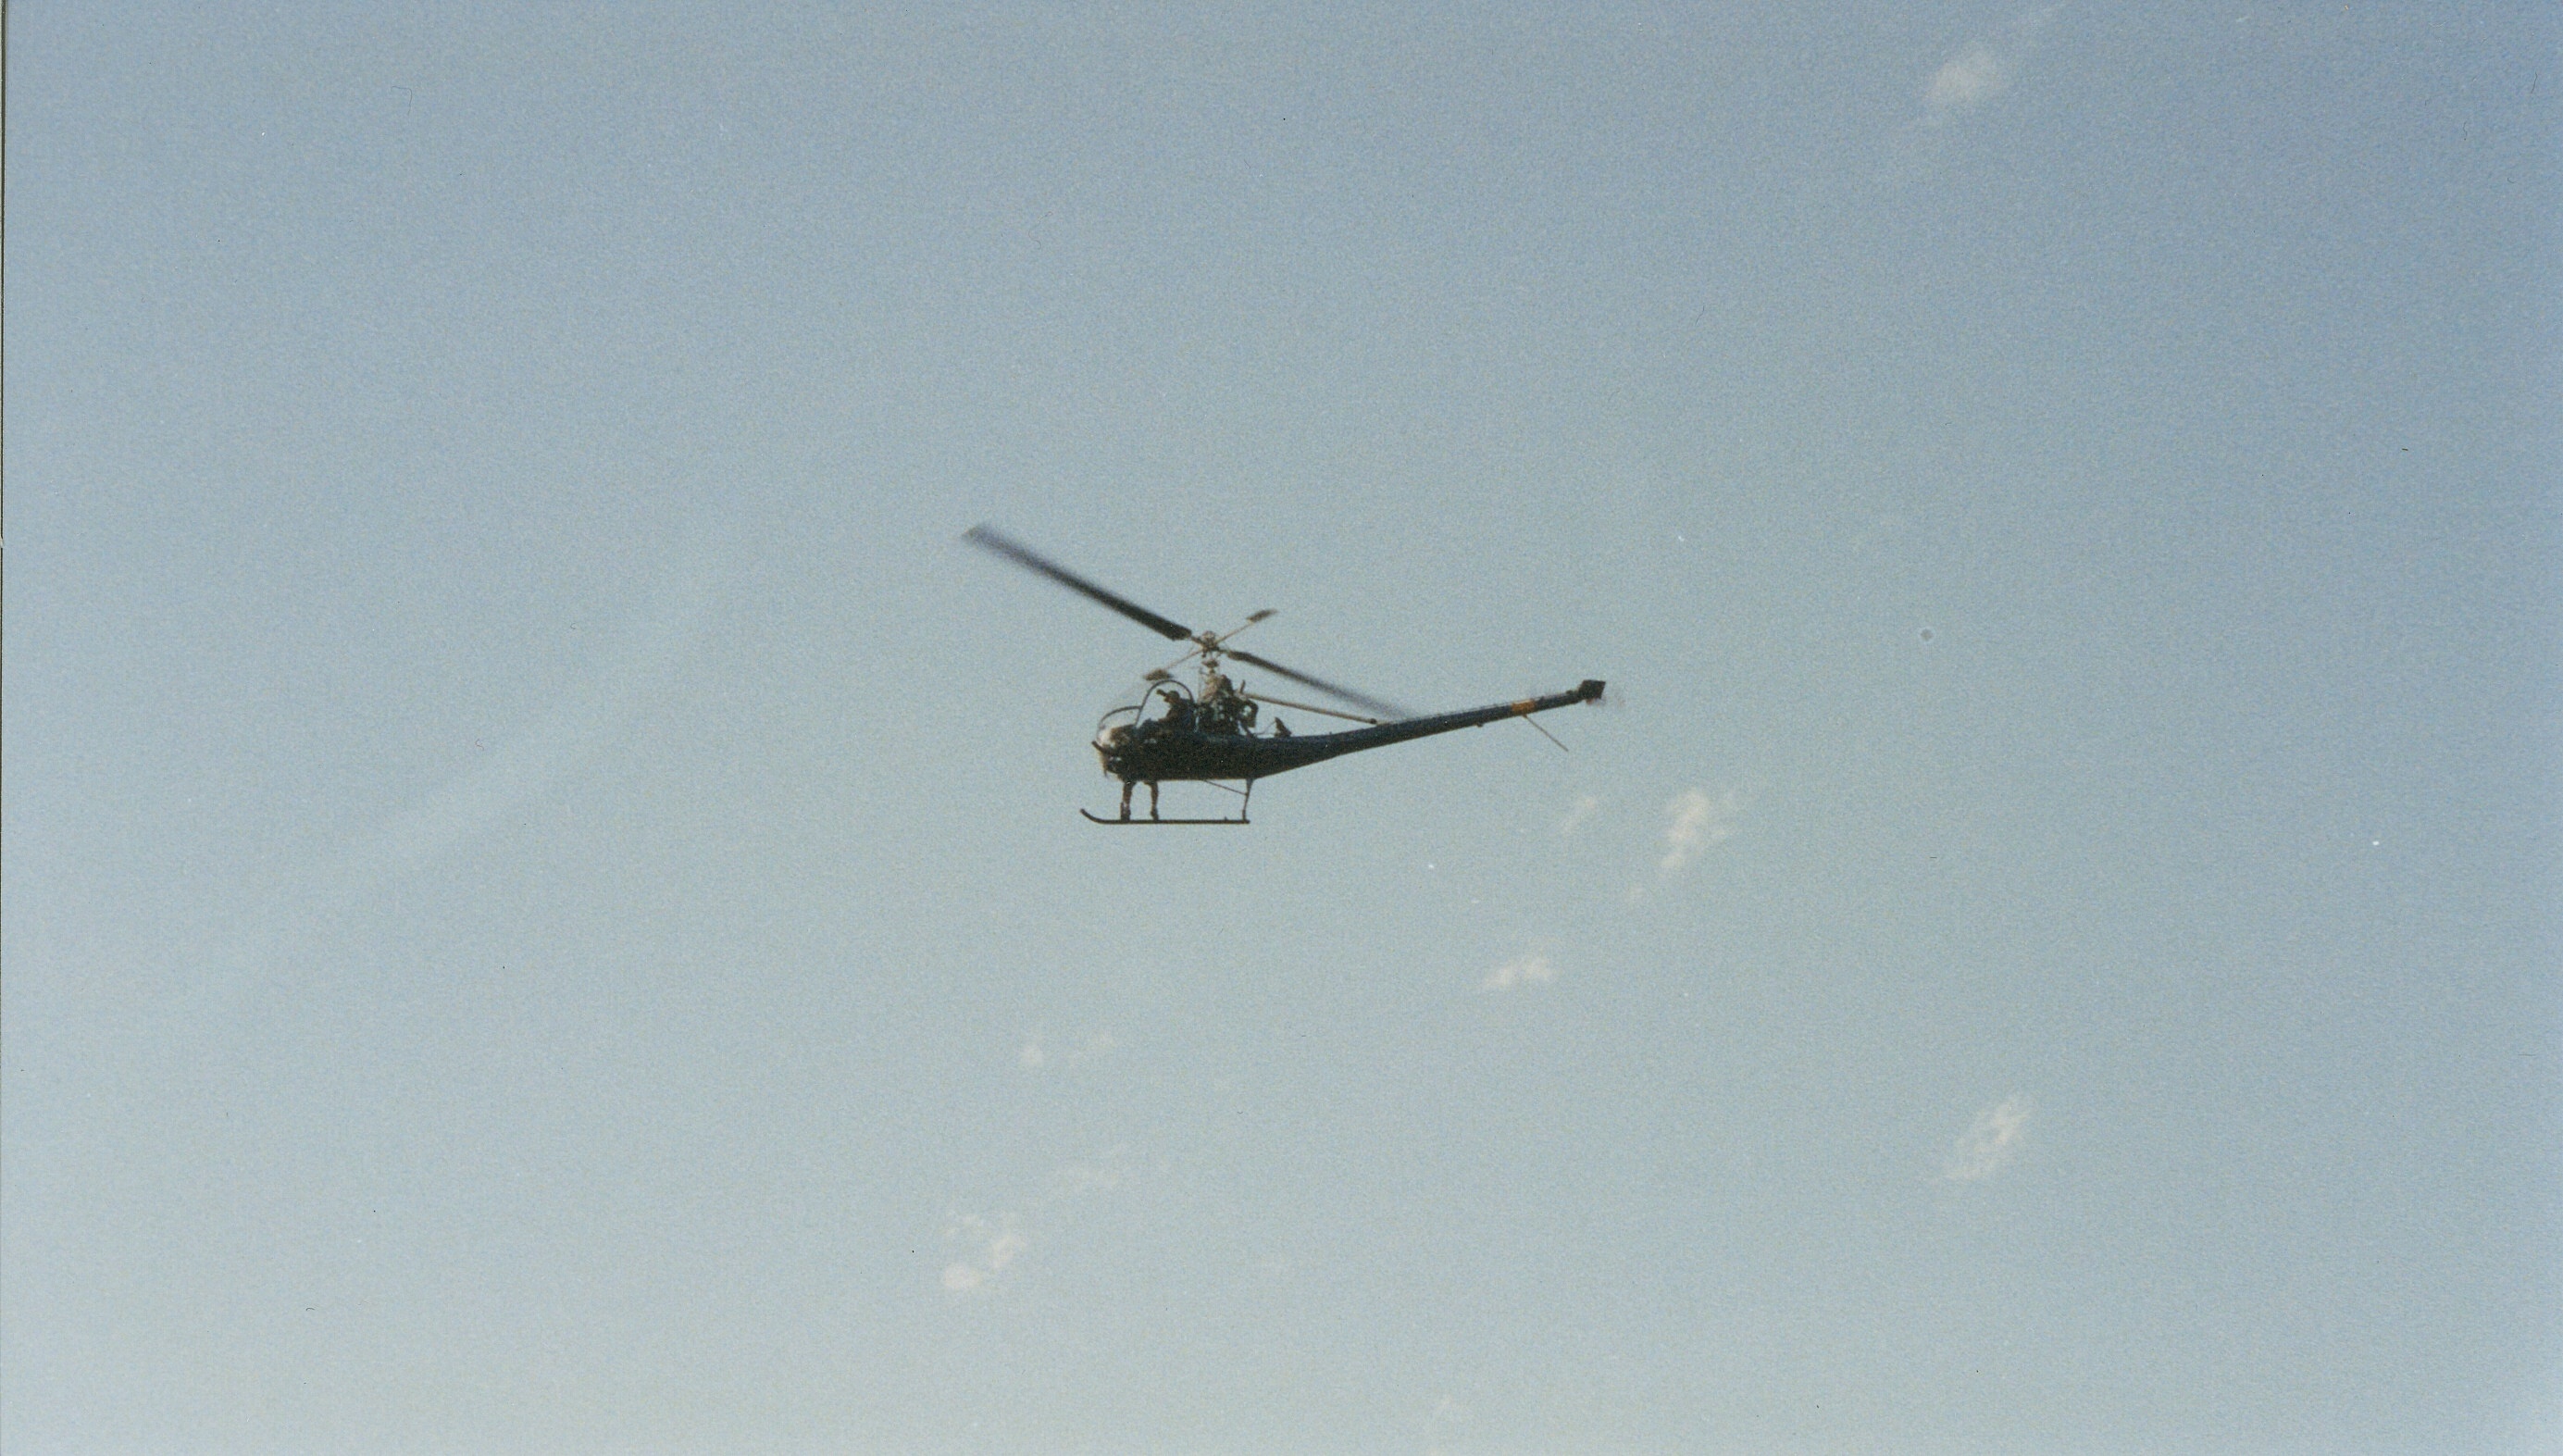 Tom Logan directing on the set of WHAT IF. (Those are his legs dangeling from the chopper!)